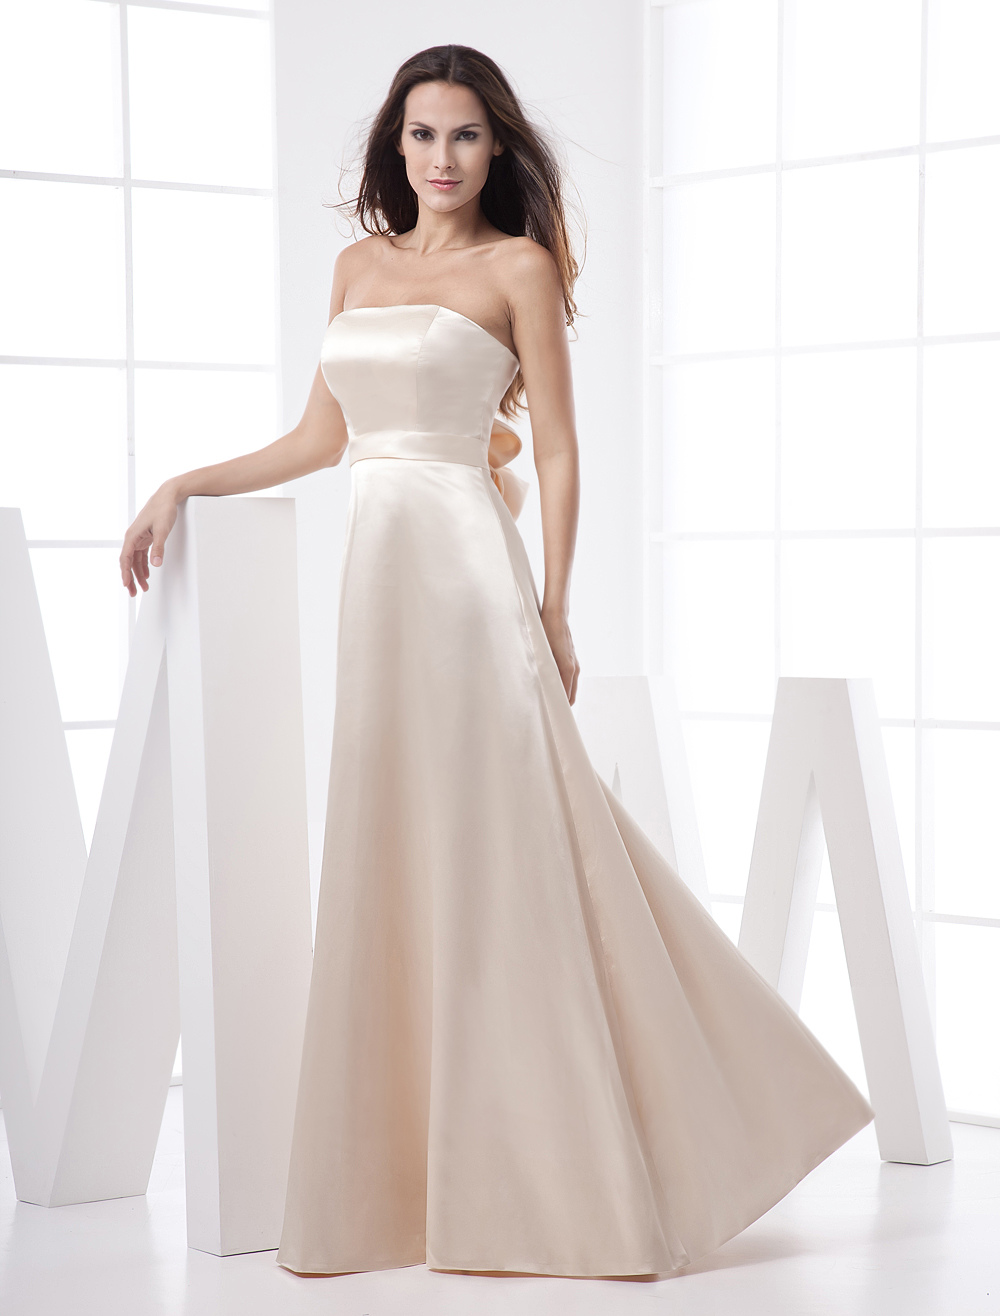 Classic Strapless Champagne Floor Length A Line Evening Dress With Unique Bow At The Back